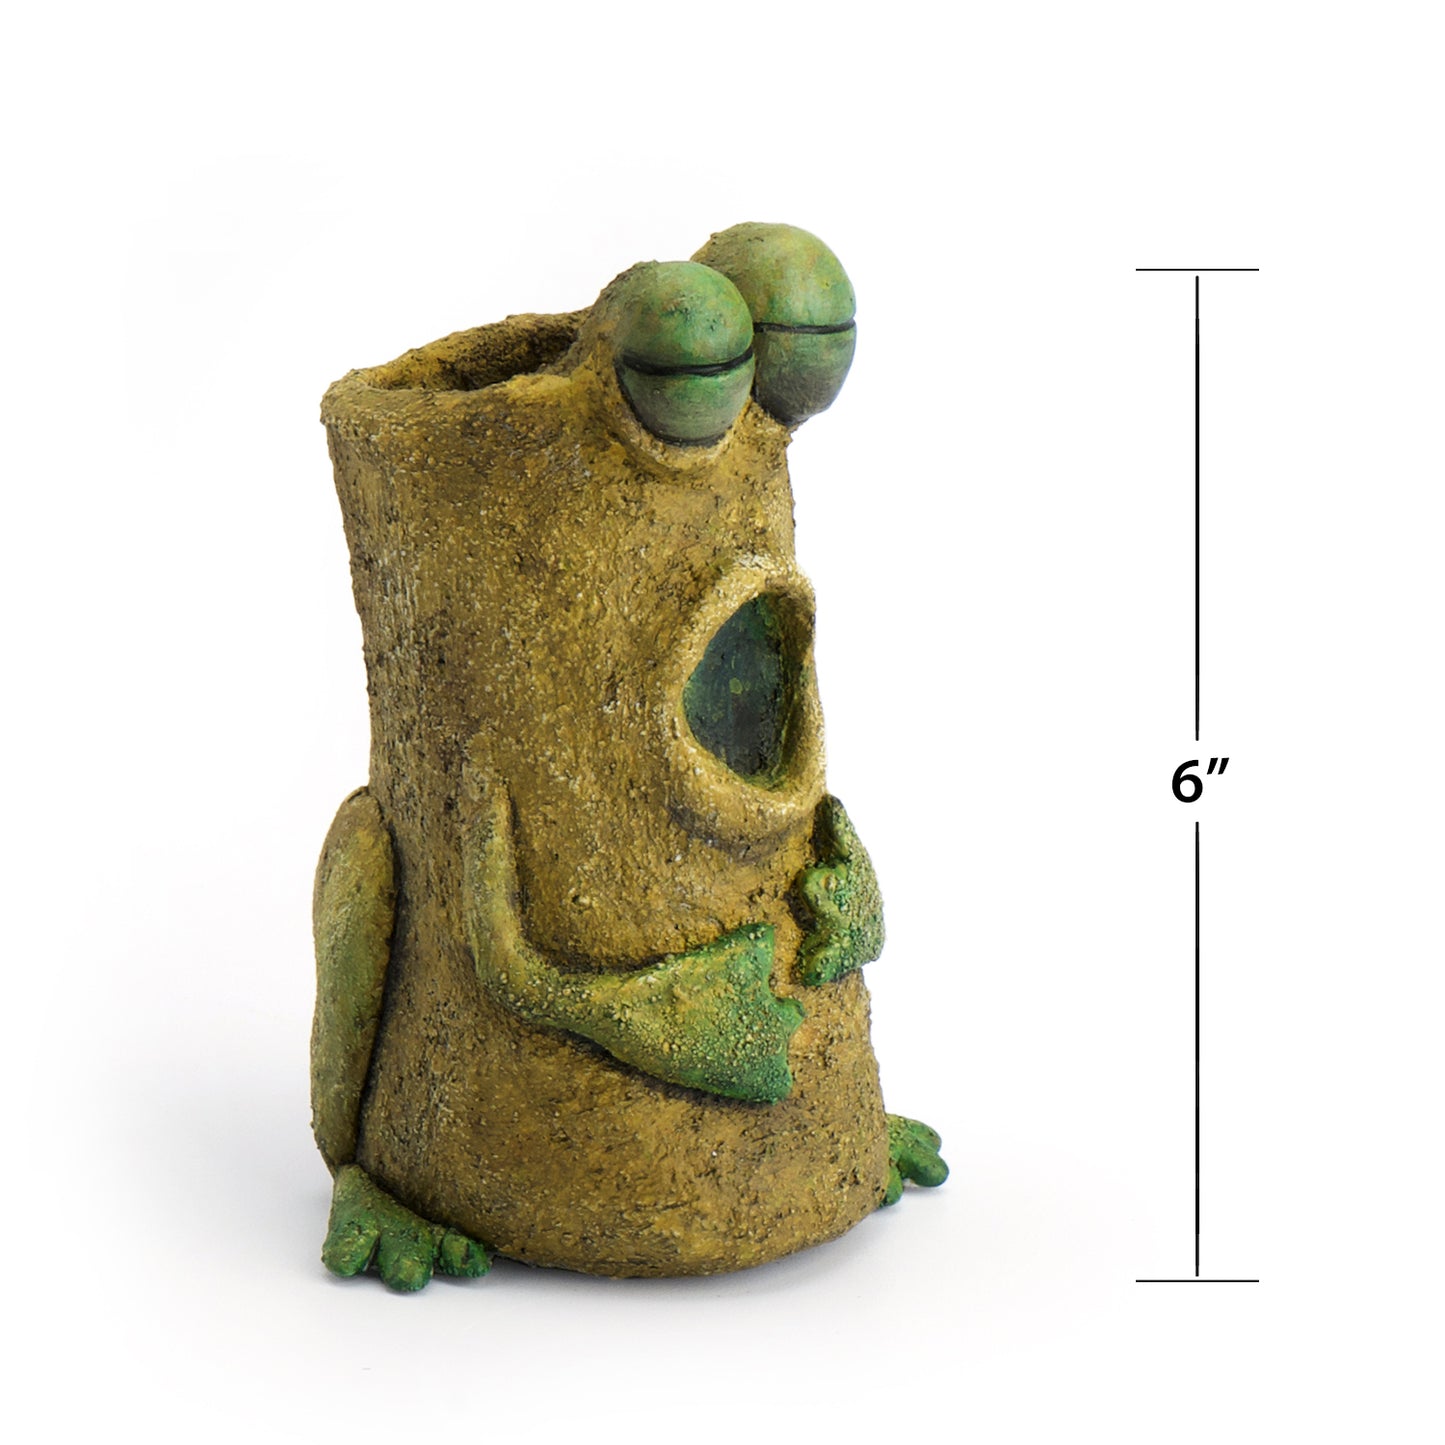 Luciano the Singing Frog Planter